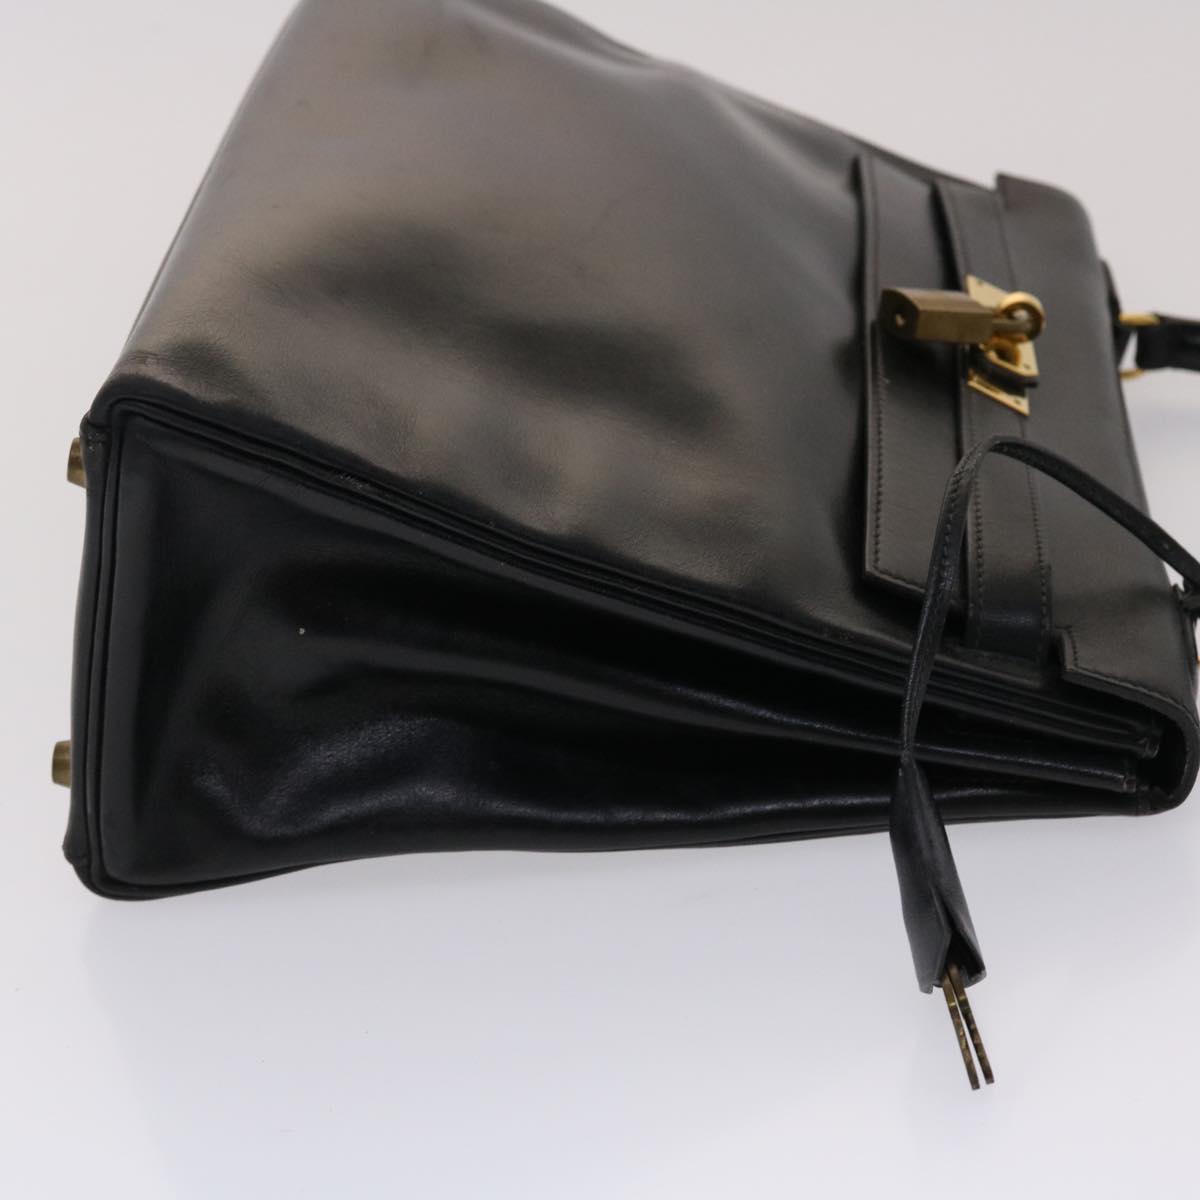 HERMES Kelly 32 Hand Bag Leather Black Auth ni110A